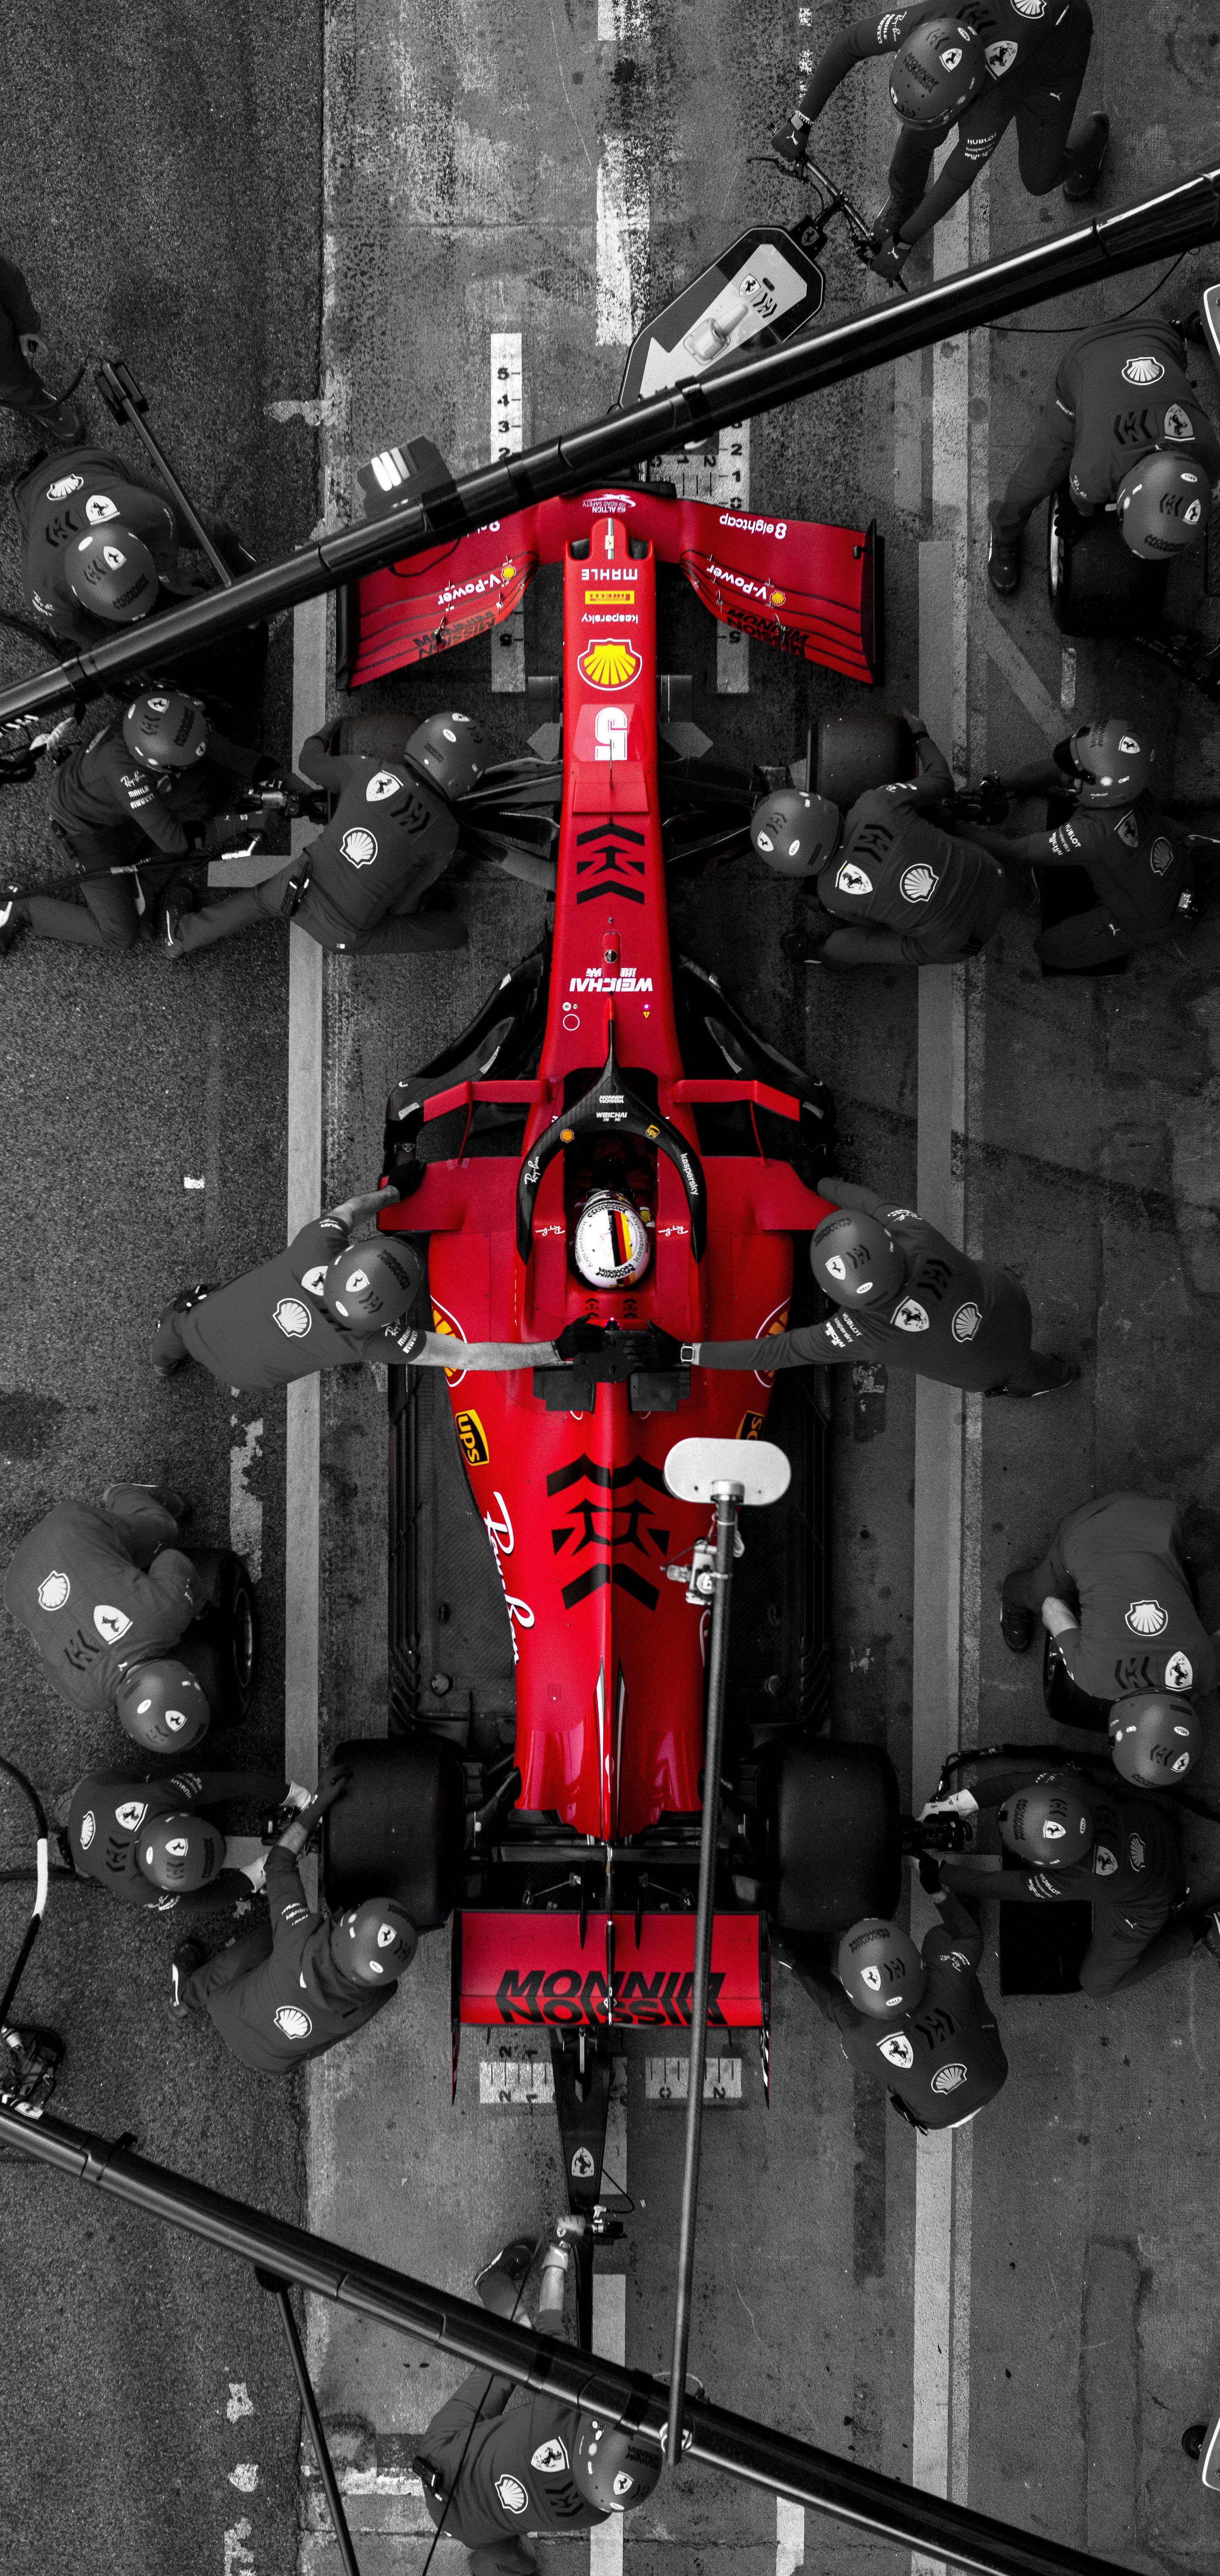 SF1000 in the pits [mobile wallpaper]